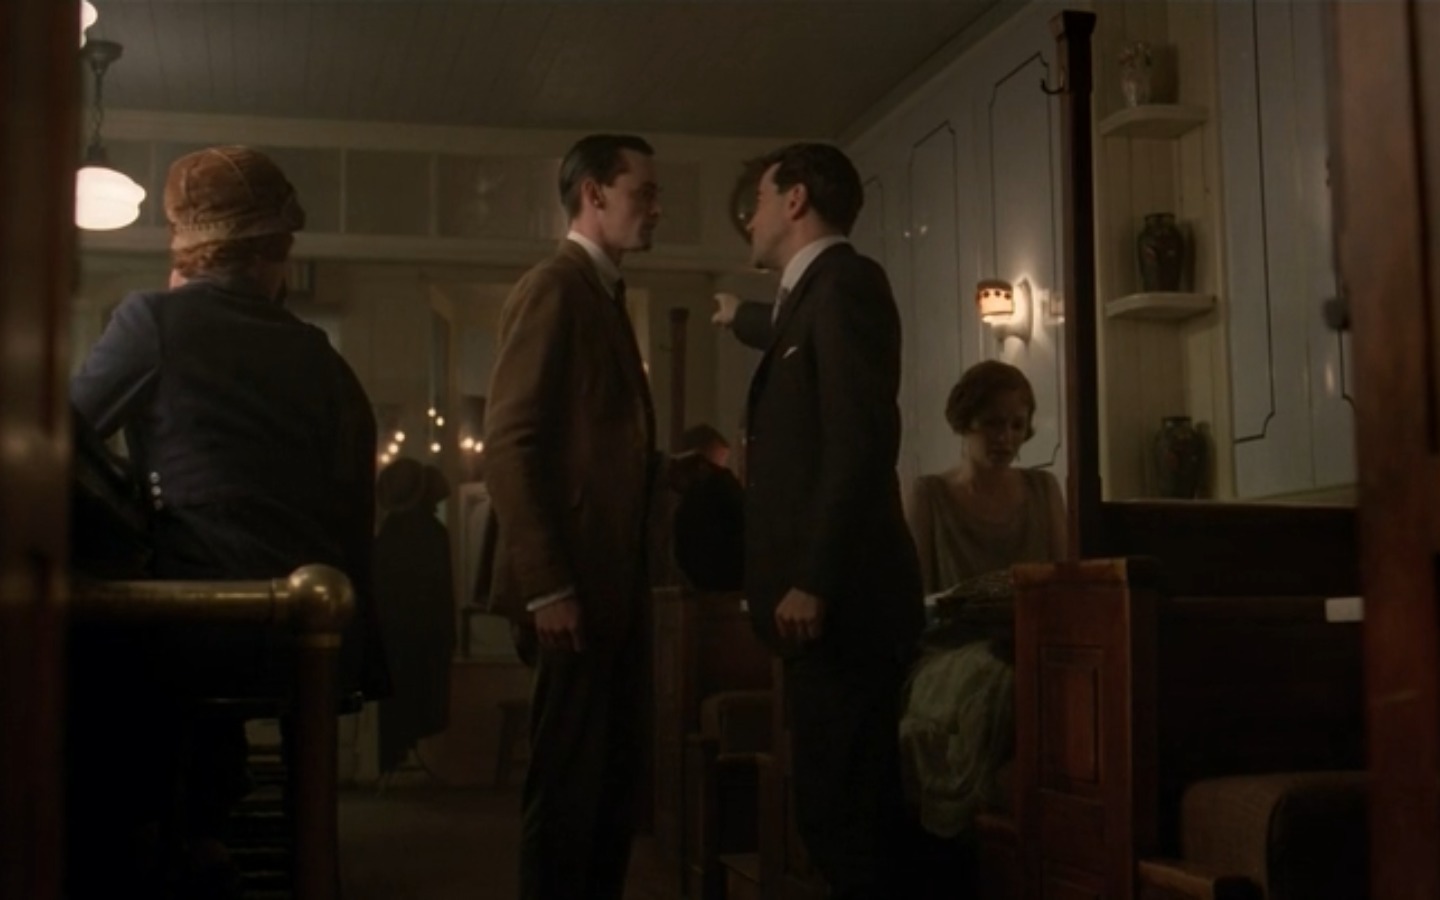 David McElwee and Ron Livingston in Boardwalk Empire